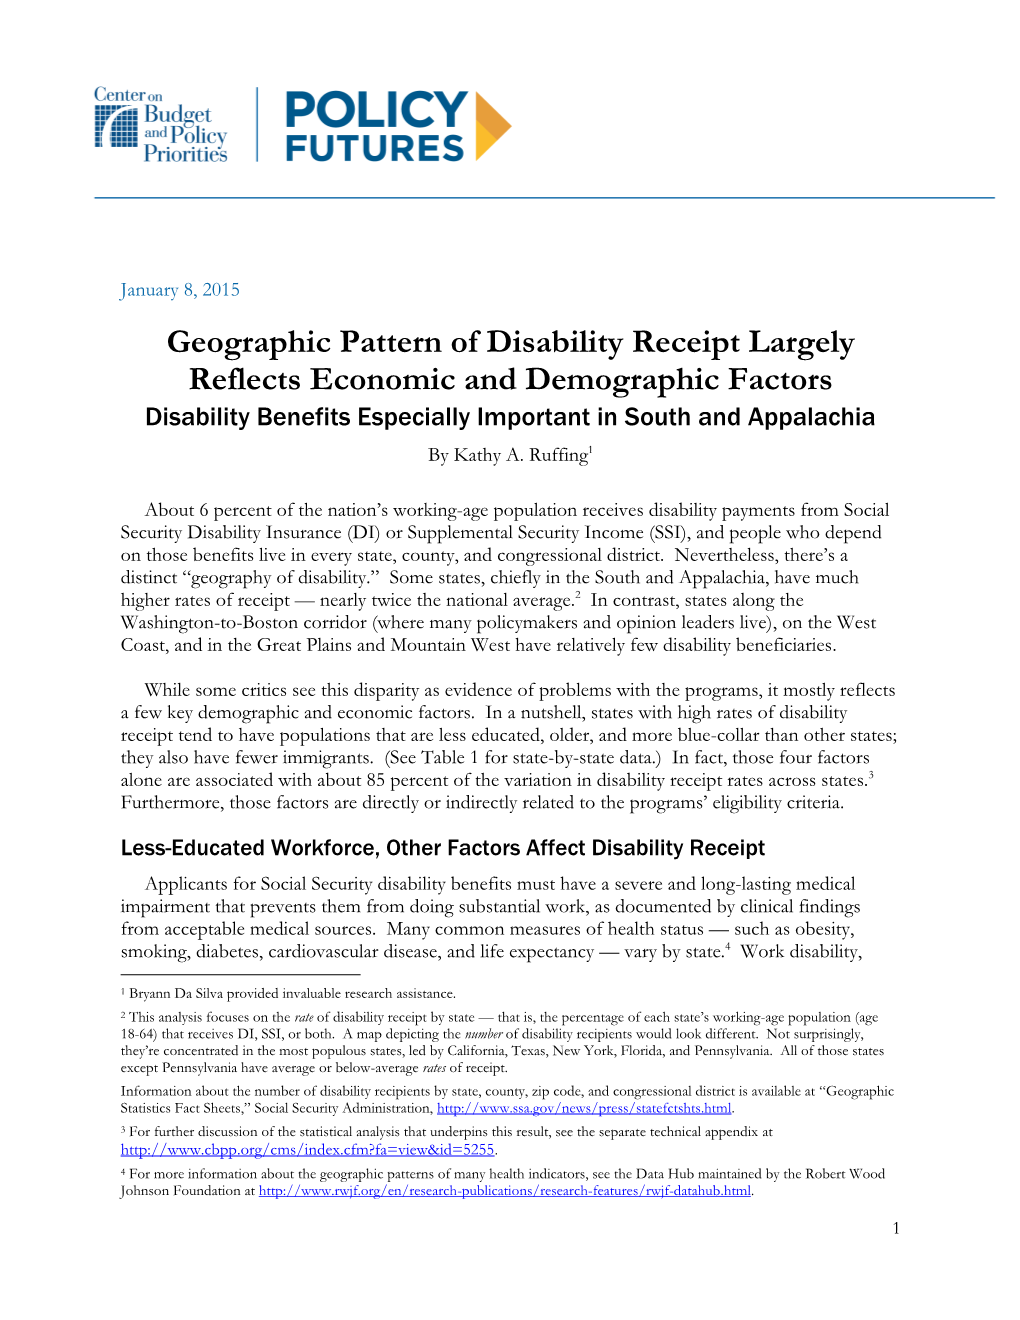 Geographic Pattern of Disability Receipt Largely Reflects Economic and Demographic Factors Disability Benefits Especially Important in South and Appalachia by Kathy A